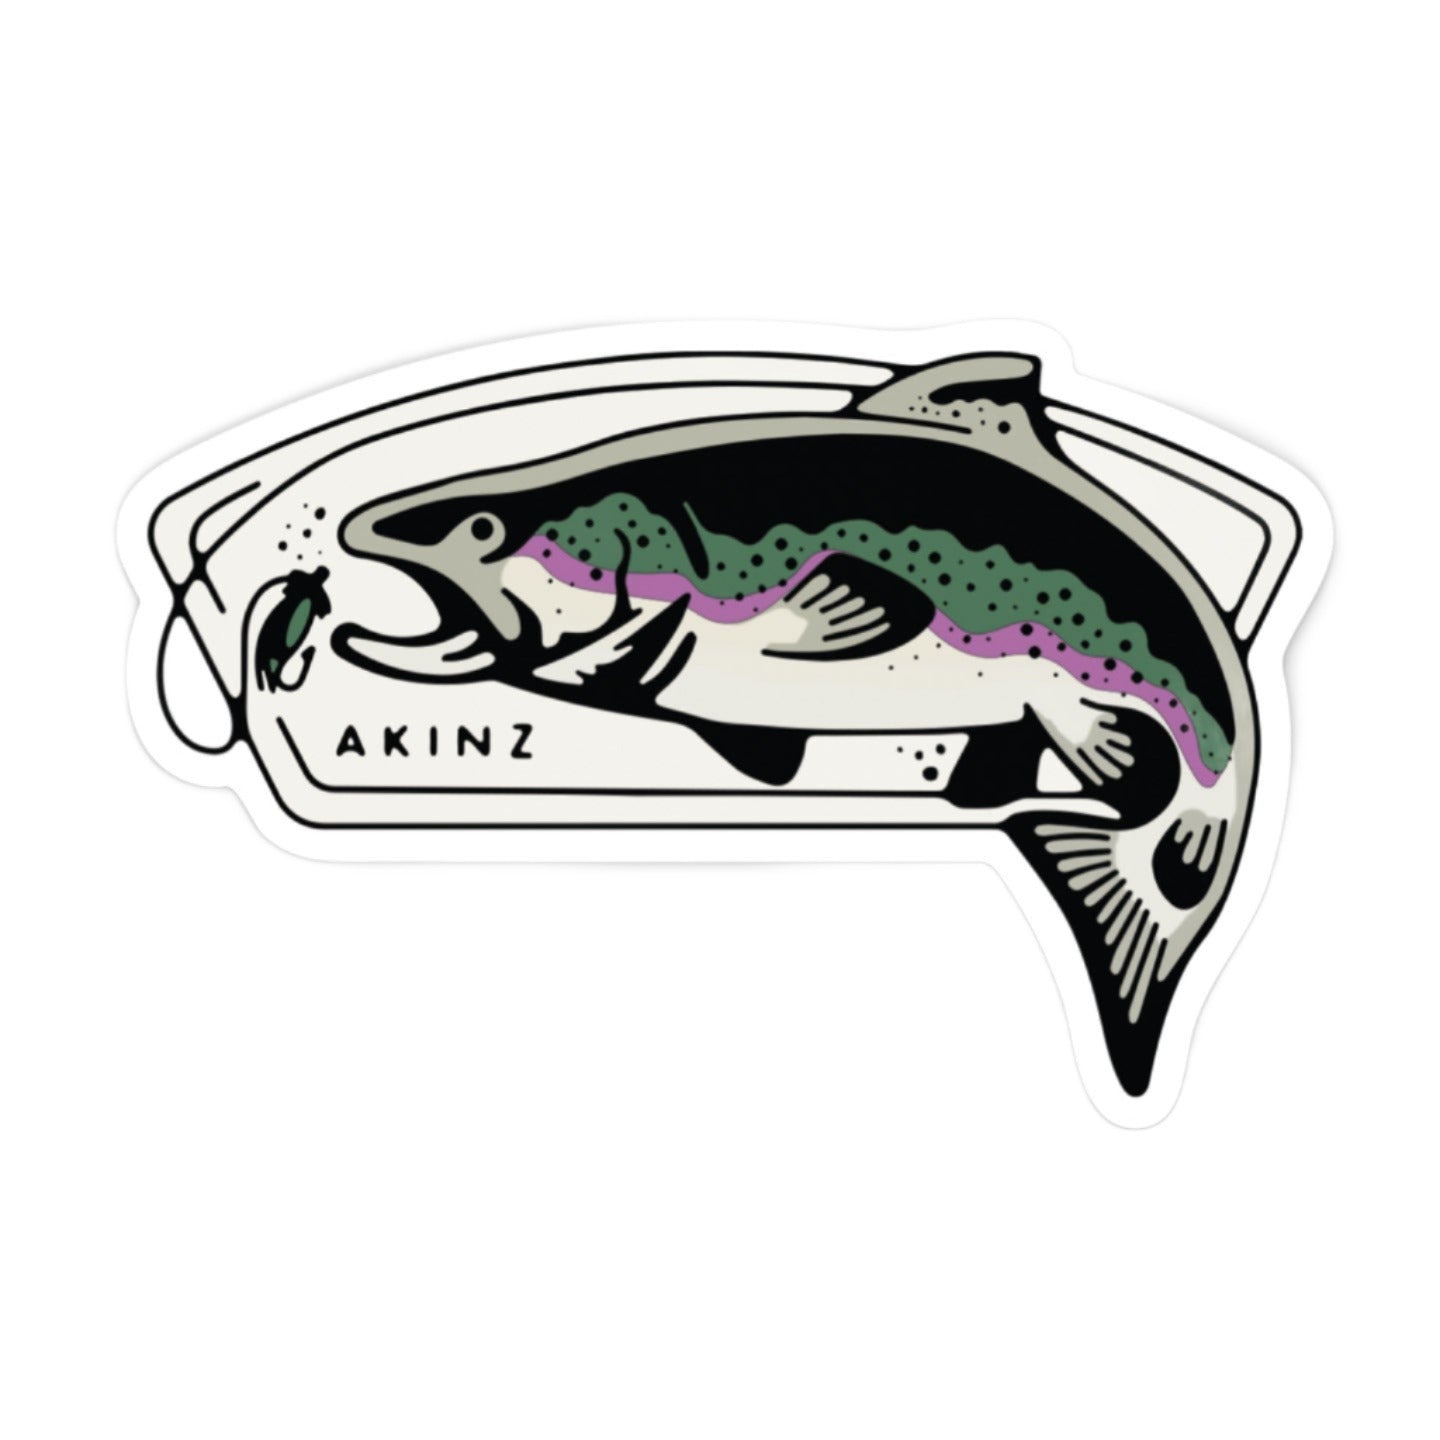 Waterproof vinyl Fish sticker featuring a rainbow trout jumping at a fishing lure